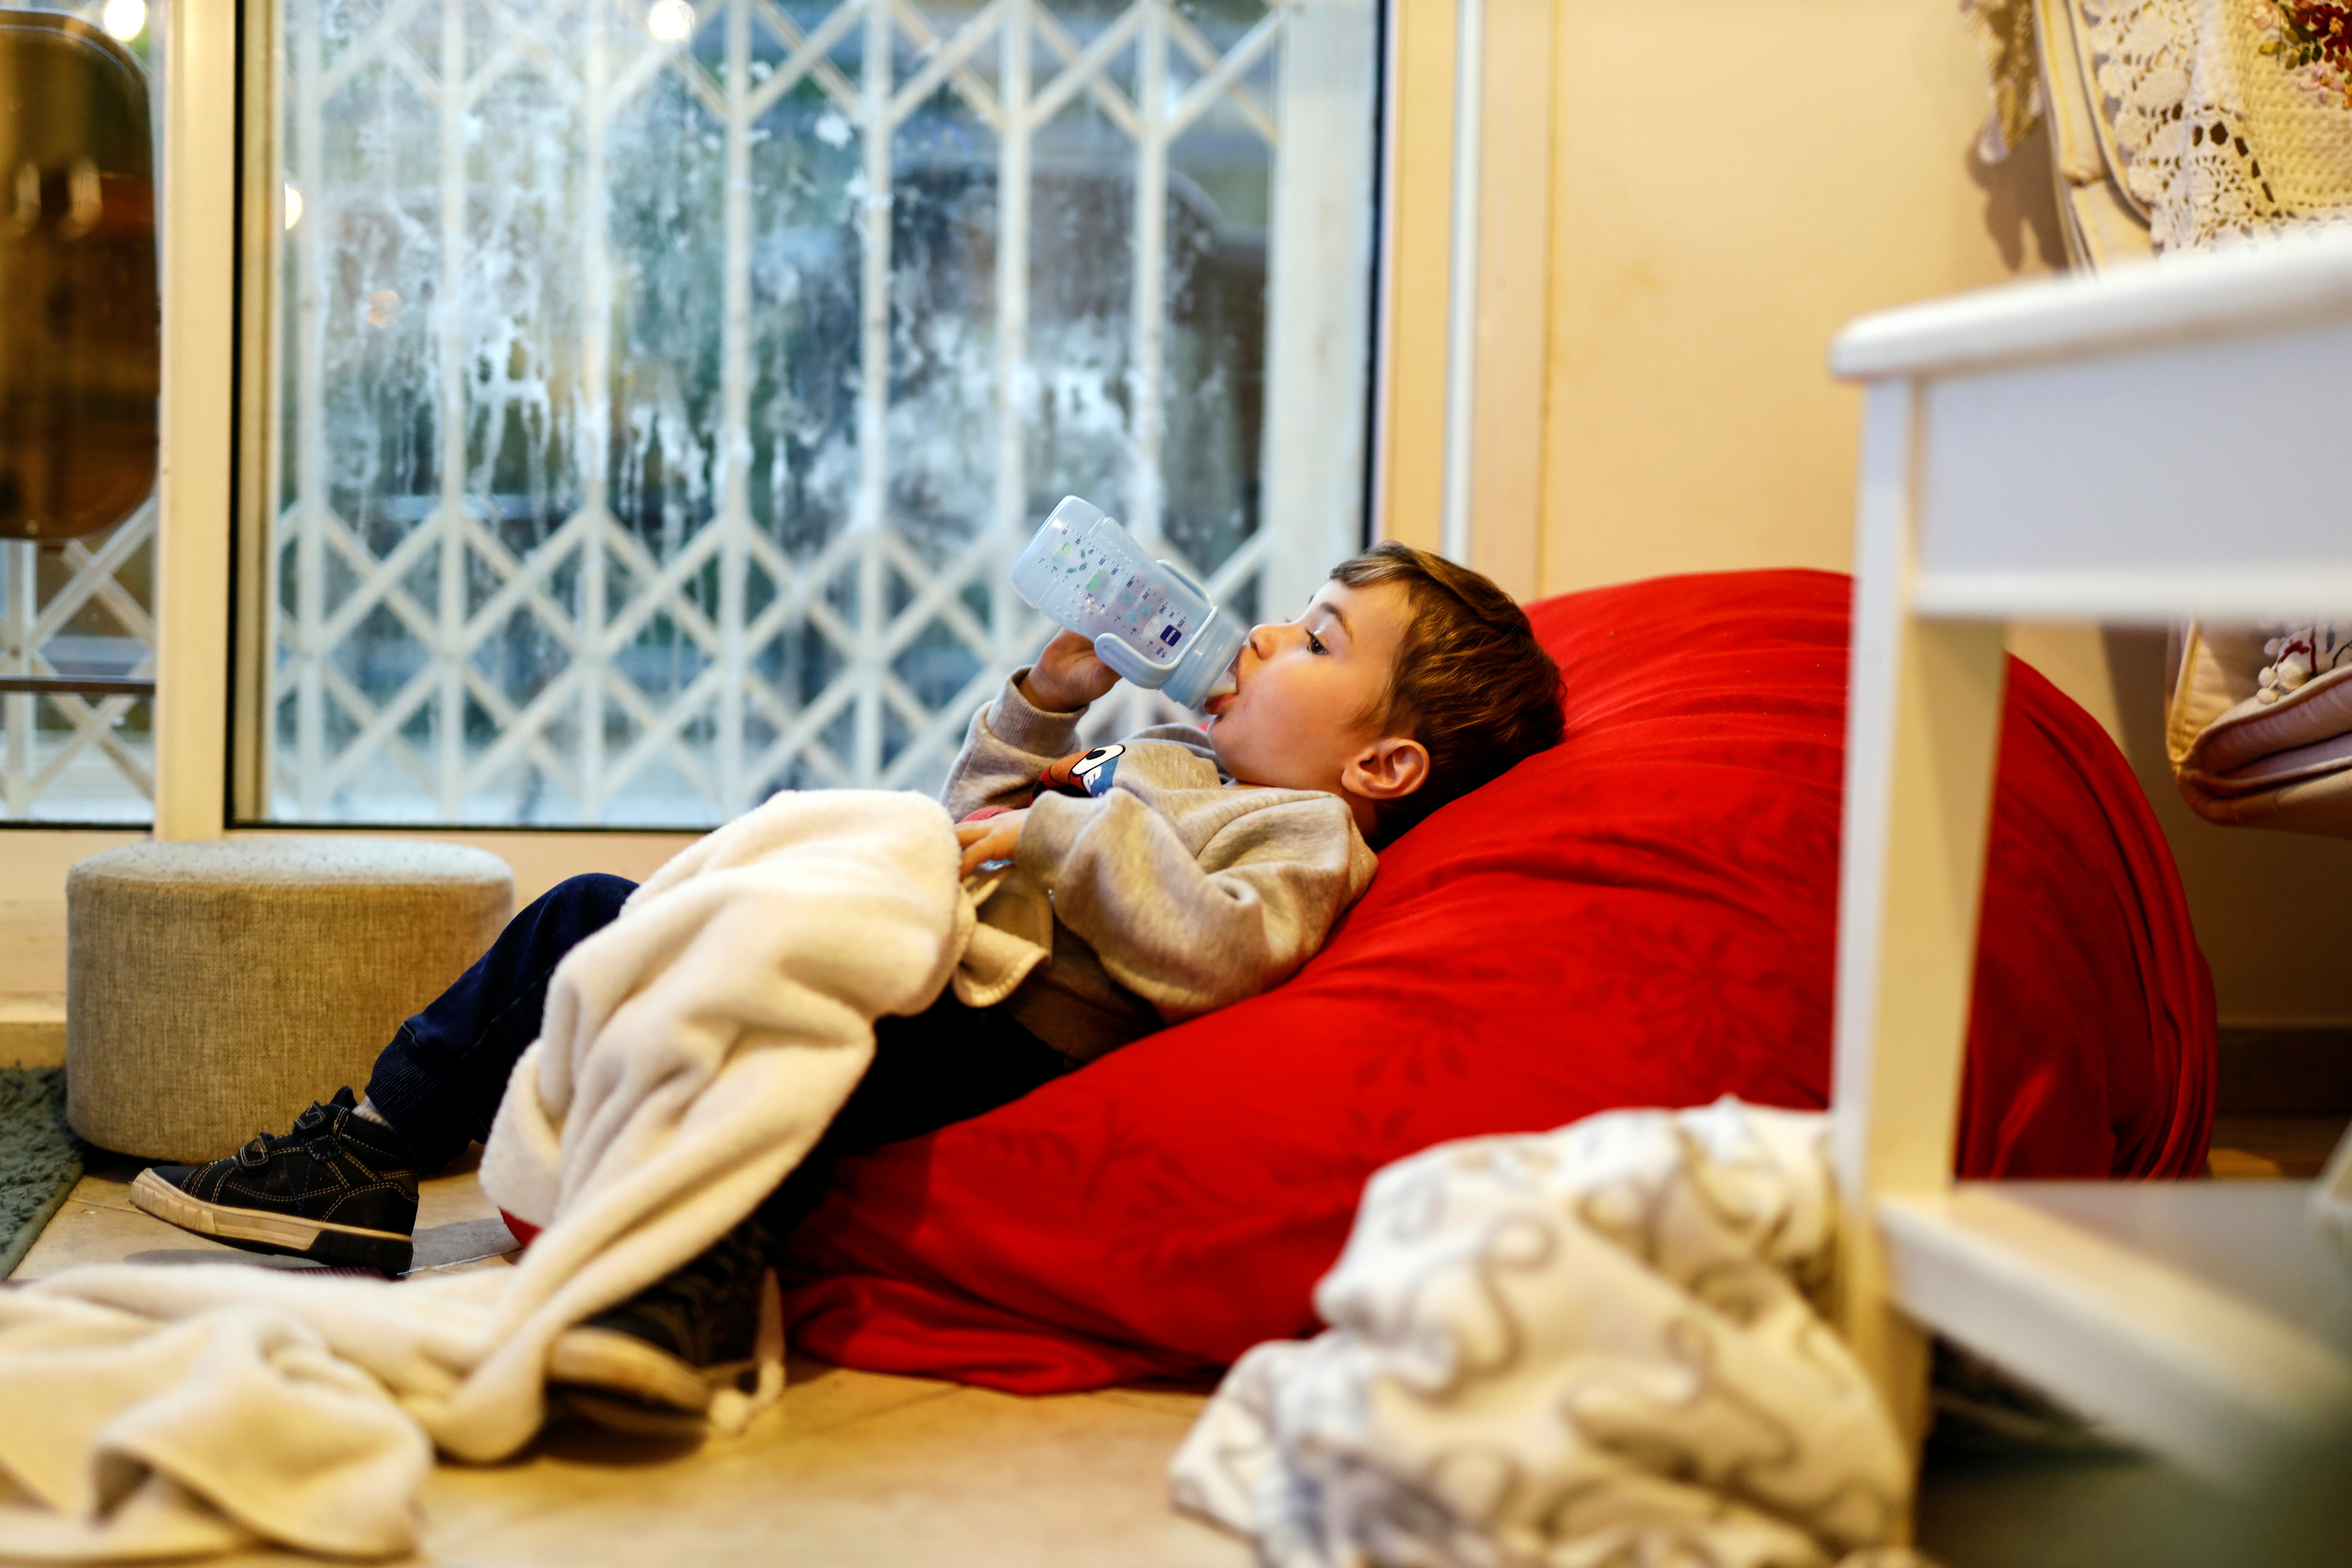 Eran, a 3-year-old Israeli boy who suffered from PIMS, a rare consequence of COVID-19, drinks from a bottle, in Tzur Hadassah